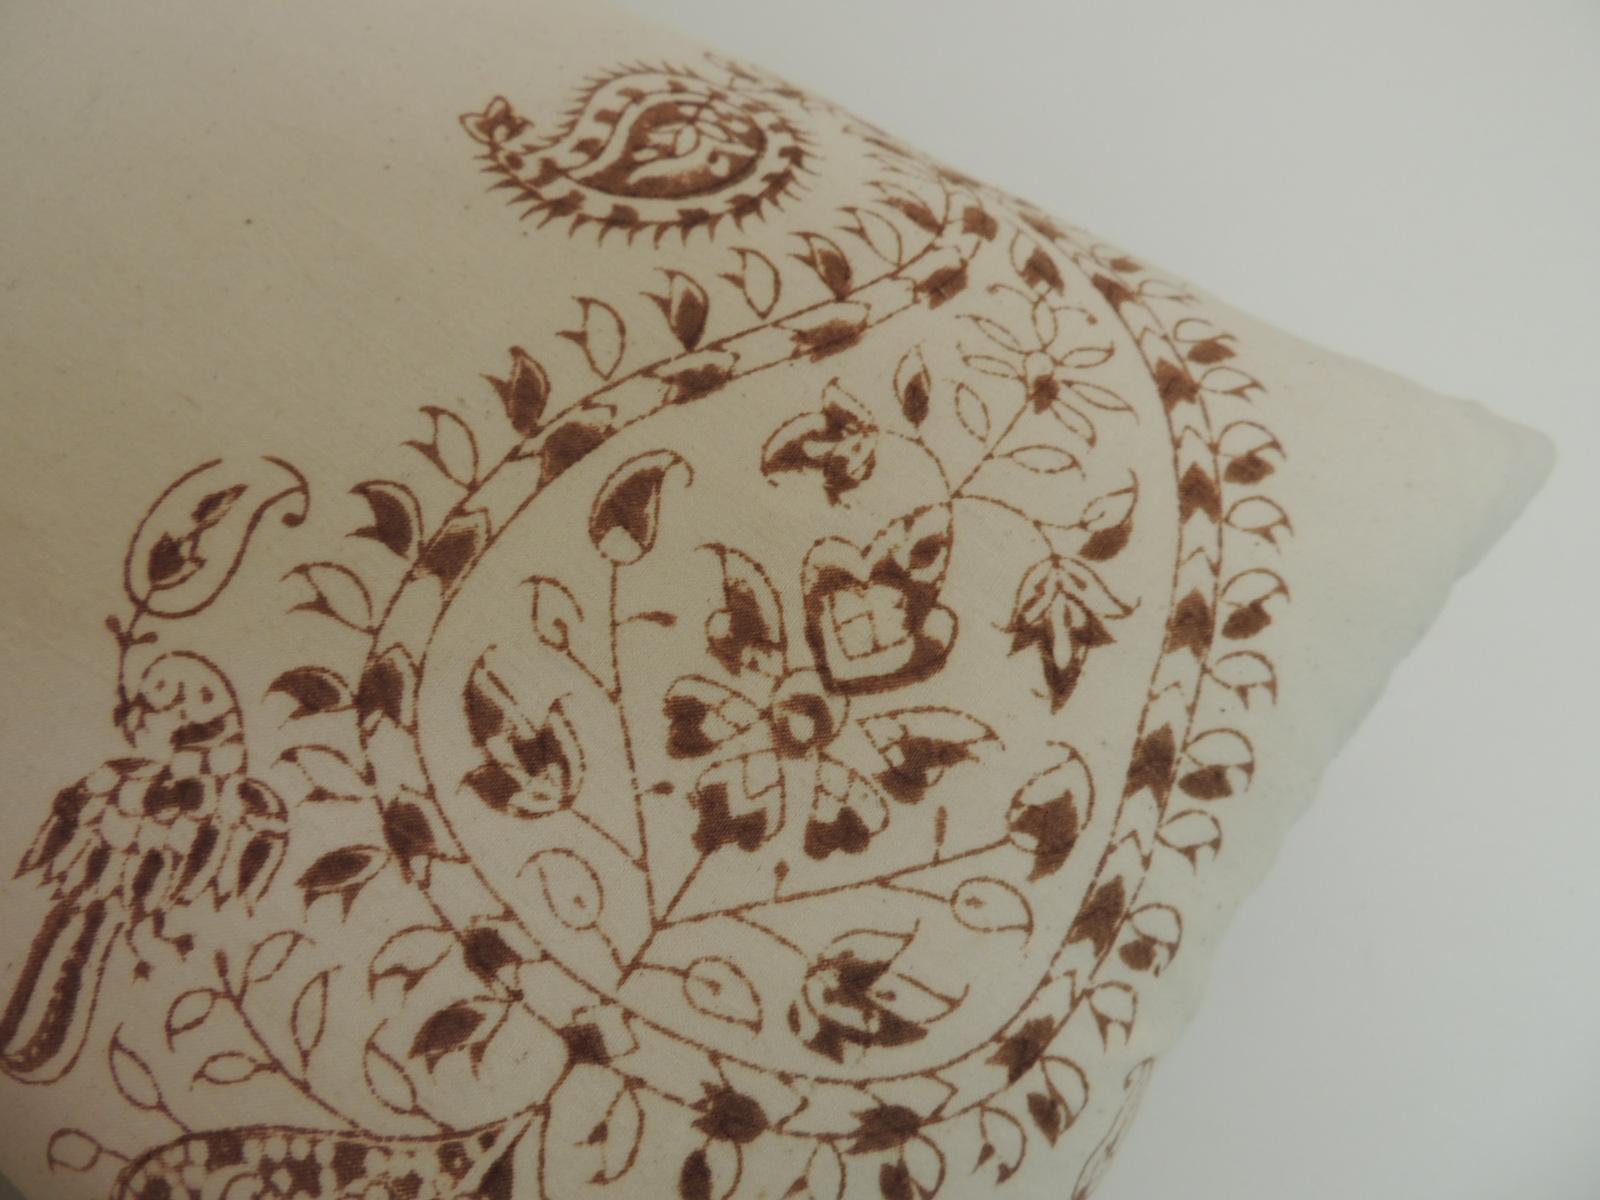 Vintage hand-blocked Indian brown paisley lumbar decorative pillow.
Decorative pillow finished with textured brown linen backing. 
Decorative vintage textile lumbar pillow handcrafted and designed in the 
USA with custom made pillow insert.